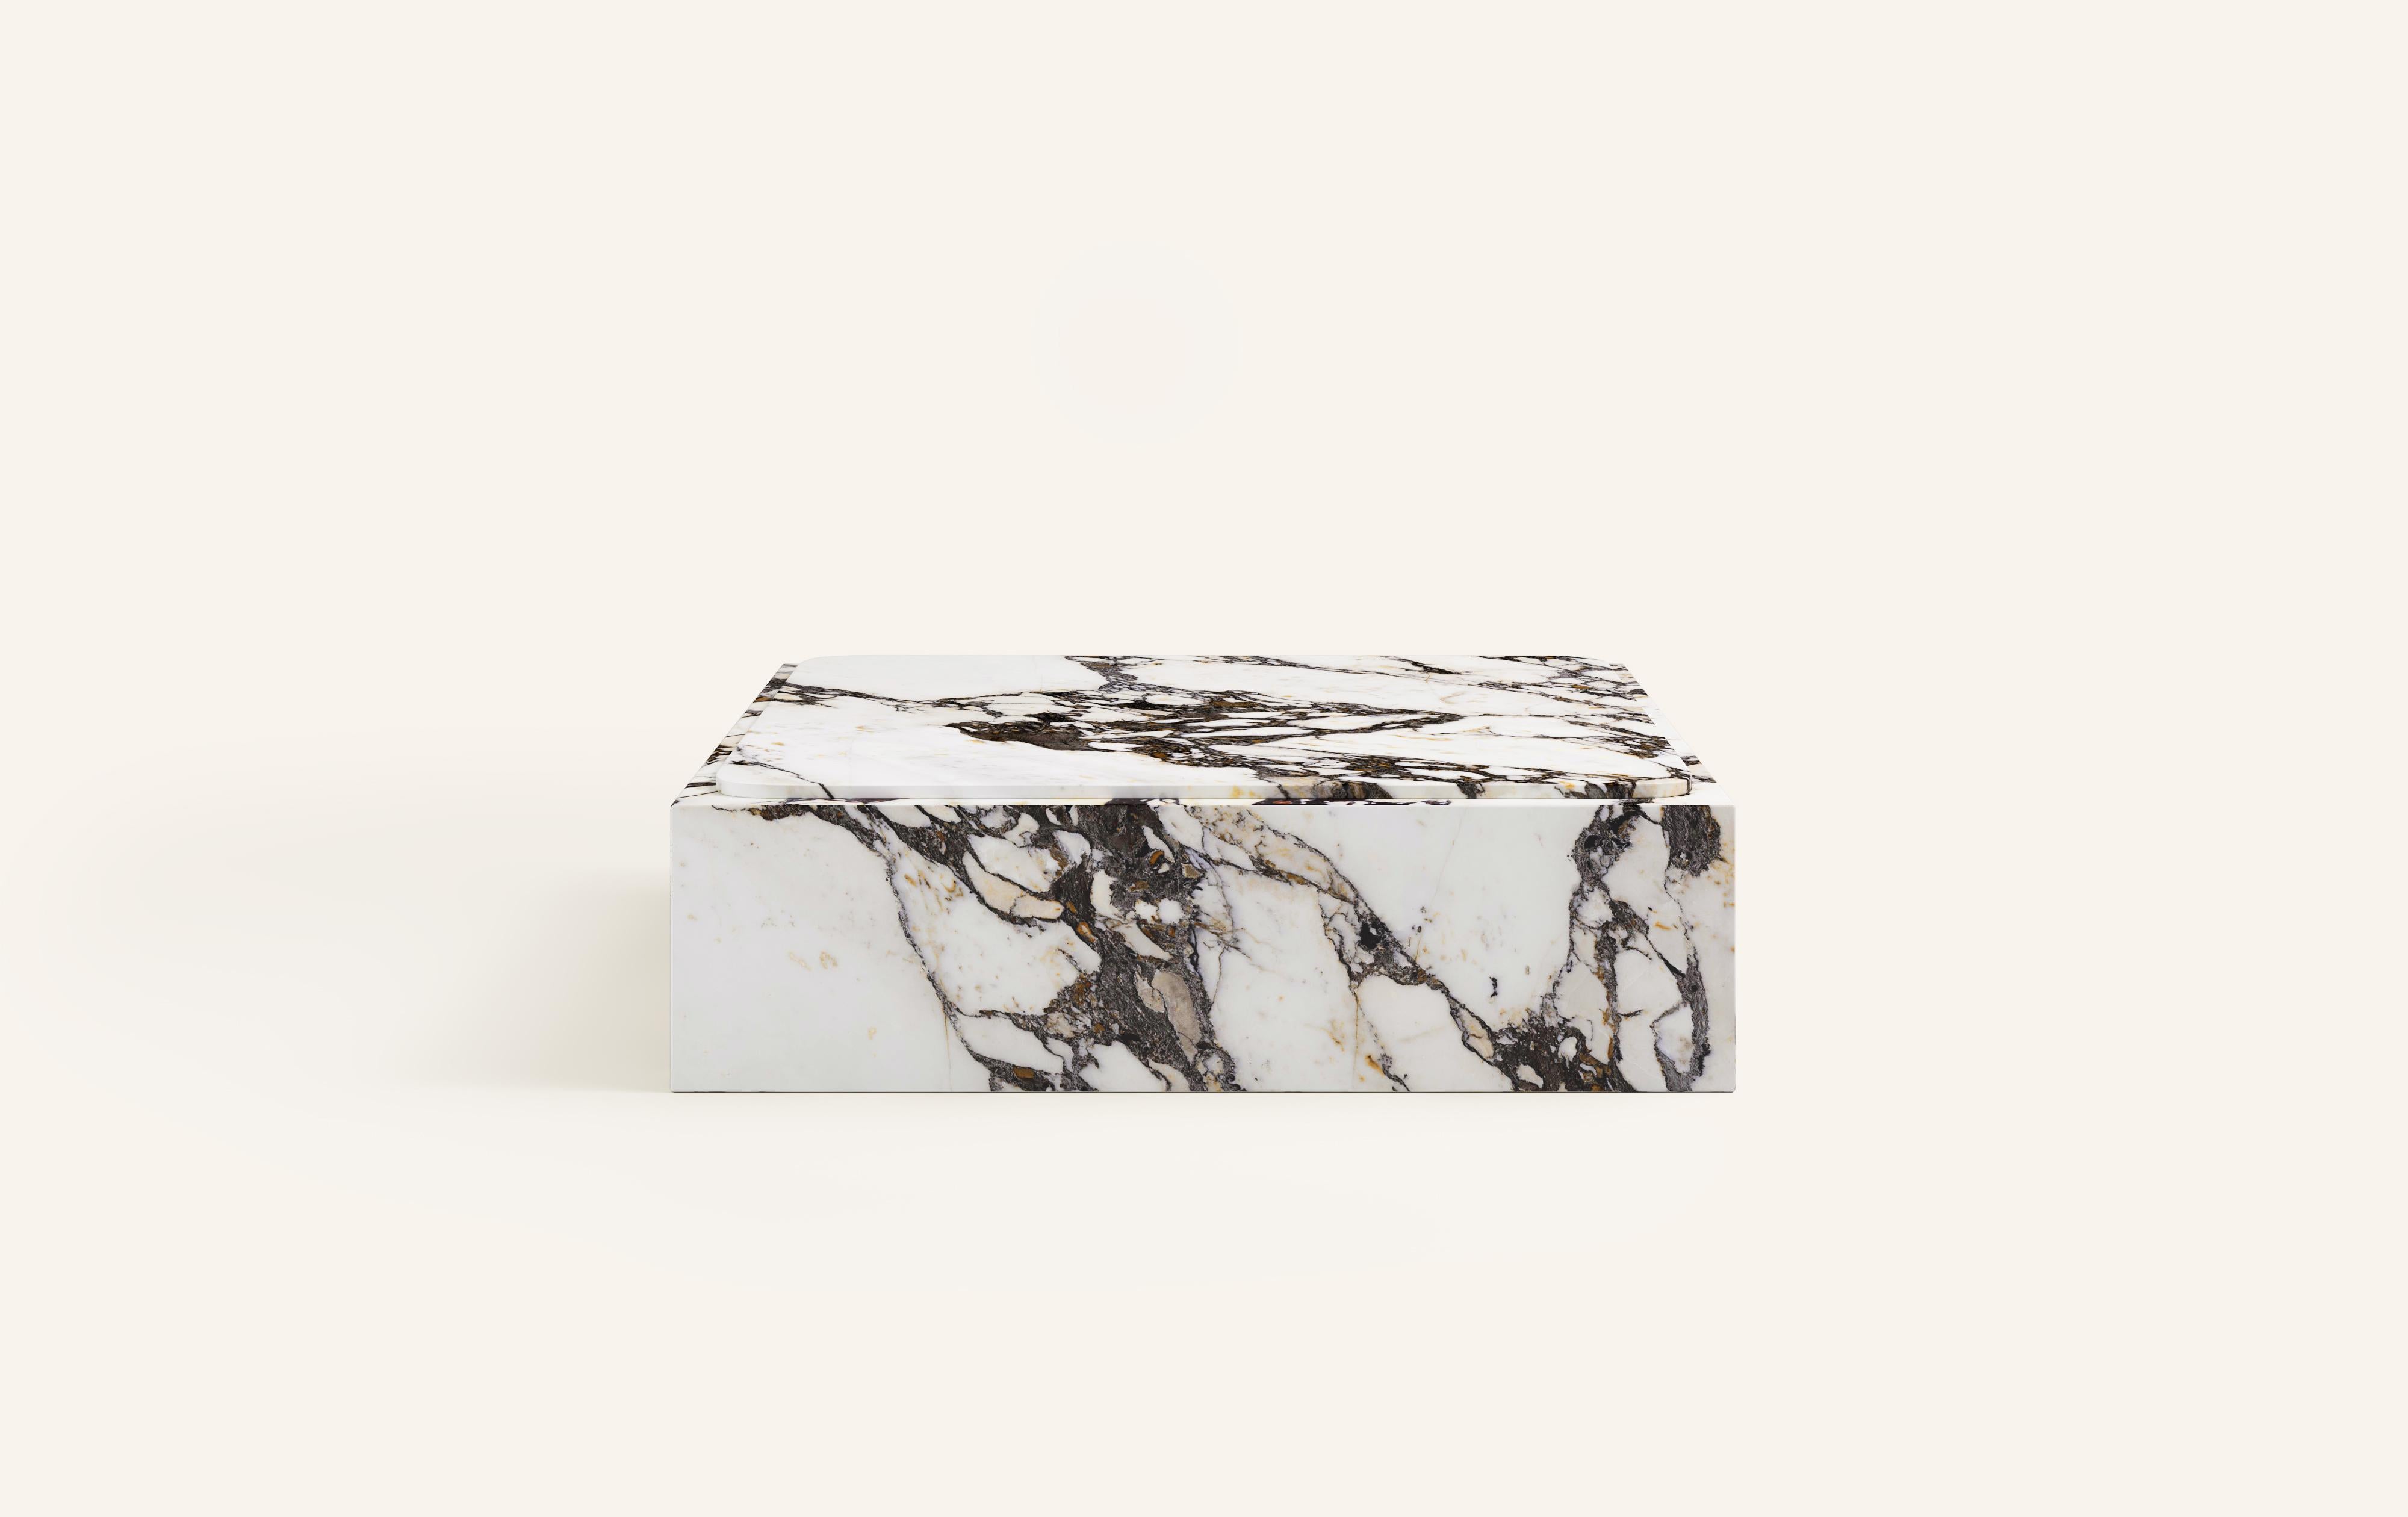 MONOLITHIC FORMS SOFTENED BY GENTLE EDGES. WITH ITS BOLD MARBLE PATTERNS CUBO IS AS VERSATILE AS IT IS STRIKING.

DIMENSIONS:
42”L x 42”W x 13”H: 
- 3/4